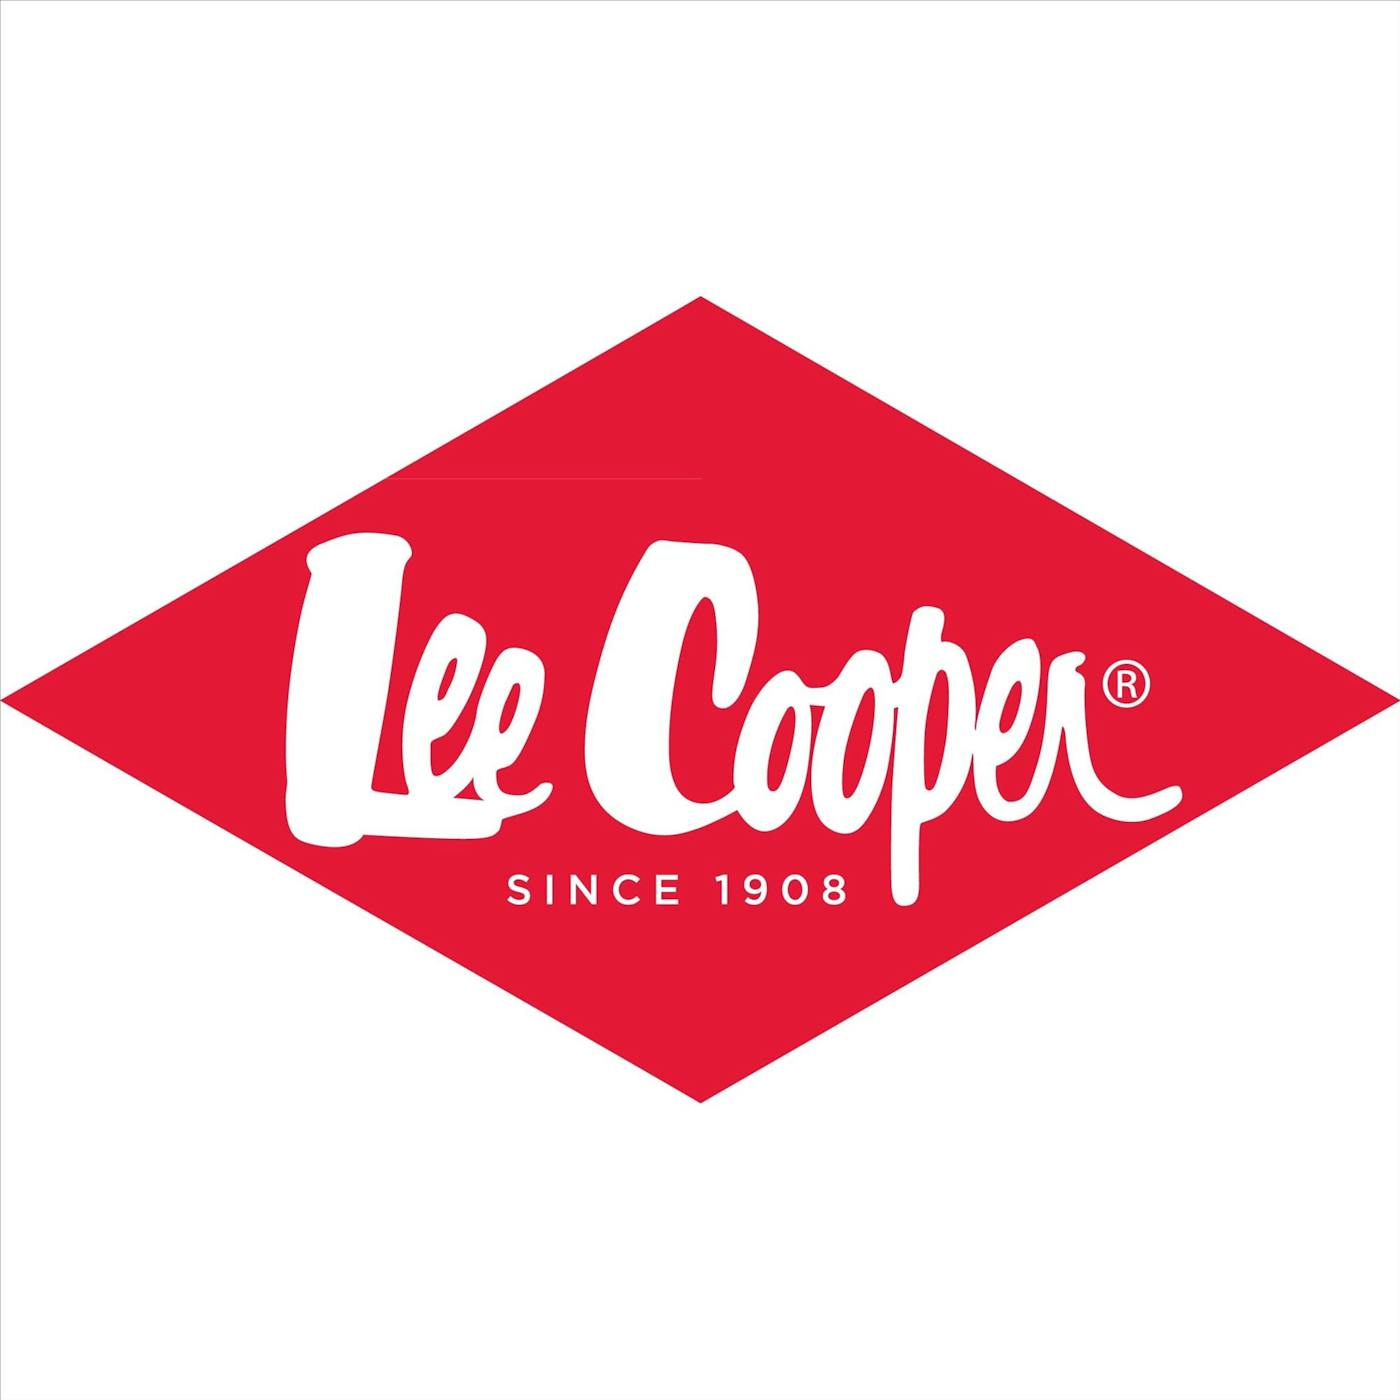 Lee Cooper - Blauwe LC134ZP bootcut jeans